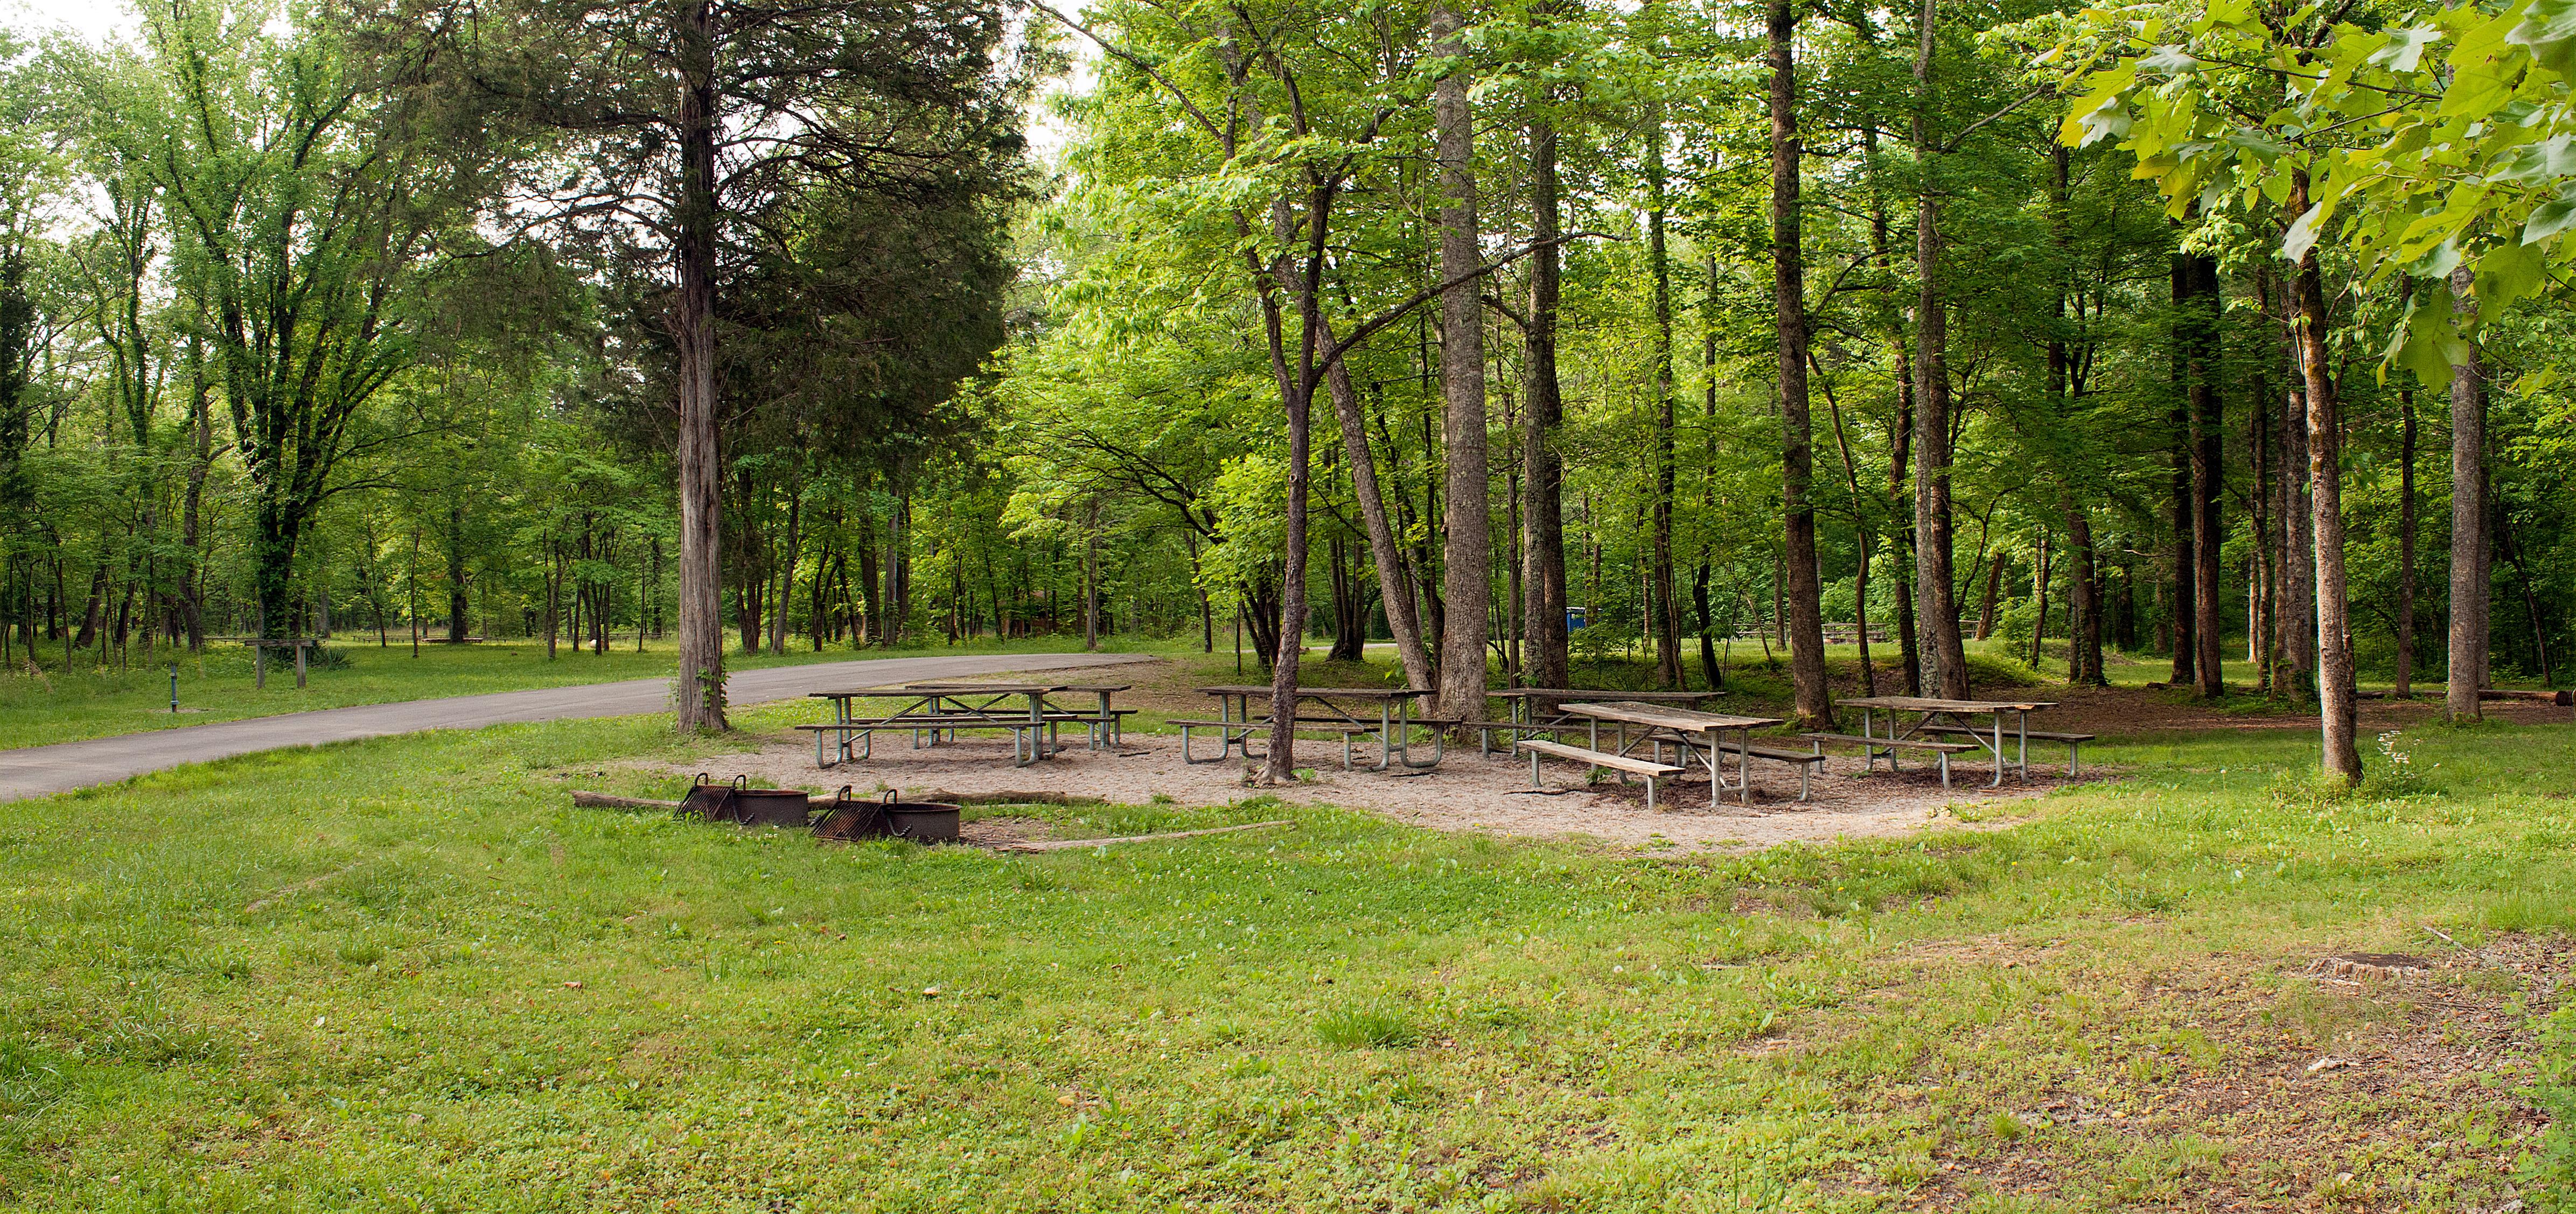 A typical Maple Springs campsite with picnic tables, fire rings, water pump and tie-off for horses.